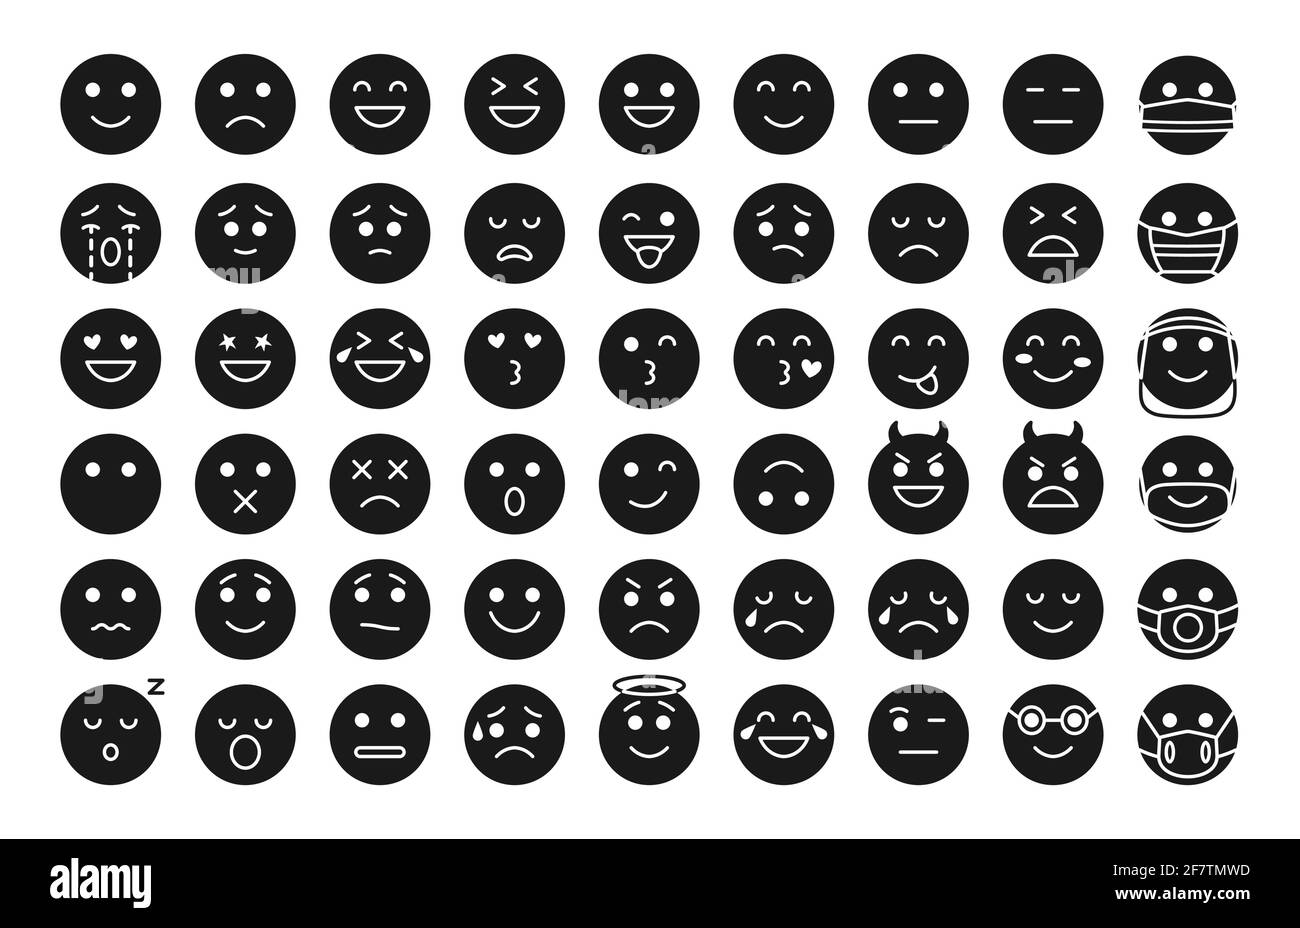 Emoji face black silhouette icon set. Different type emoticon smile template collection. Mood or facial emotion sign. Faces expressing laugh, sad, angry. Emoticons in mask Isolated vector illustration Stock Vector